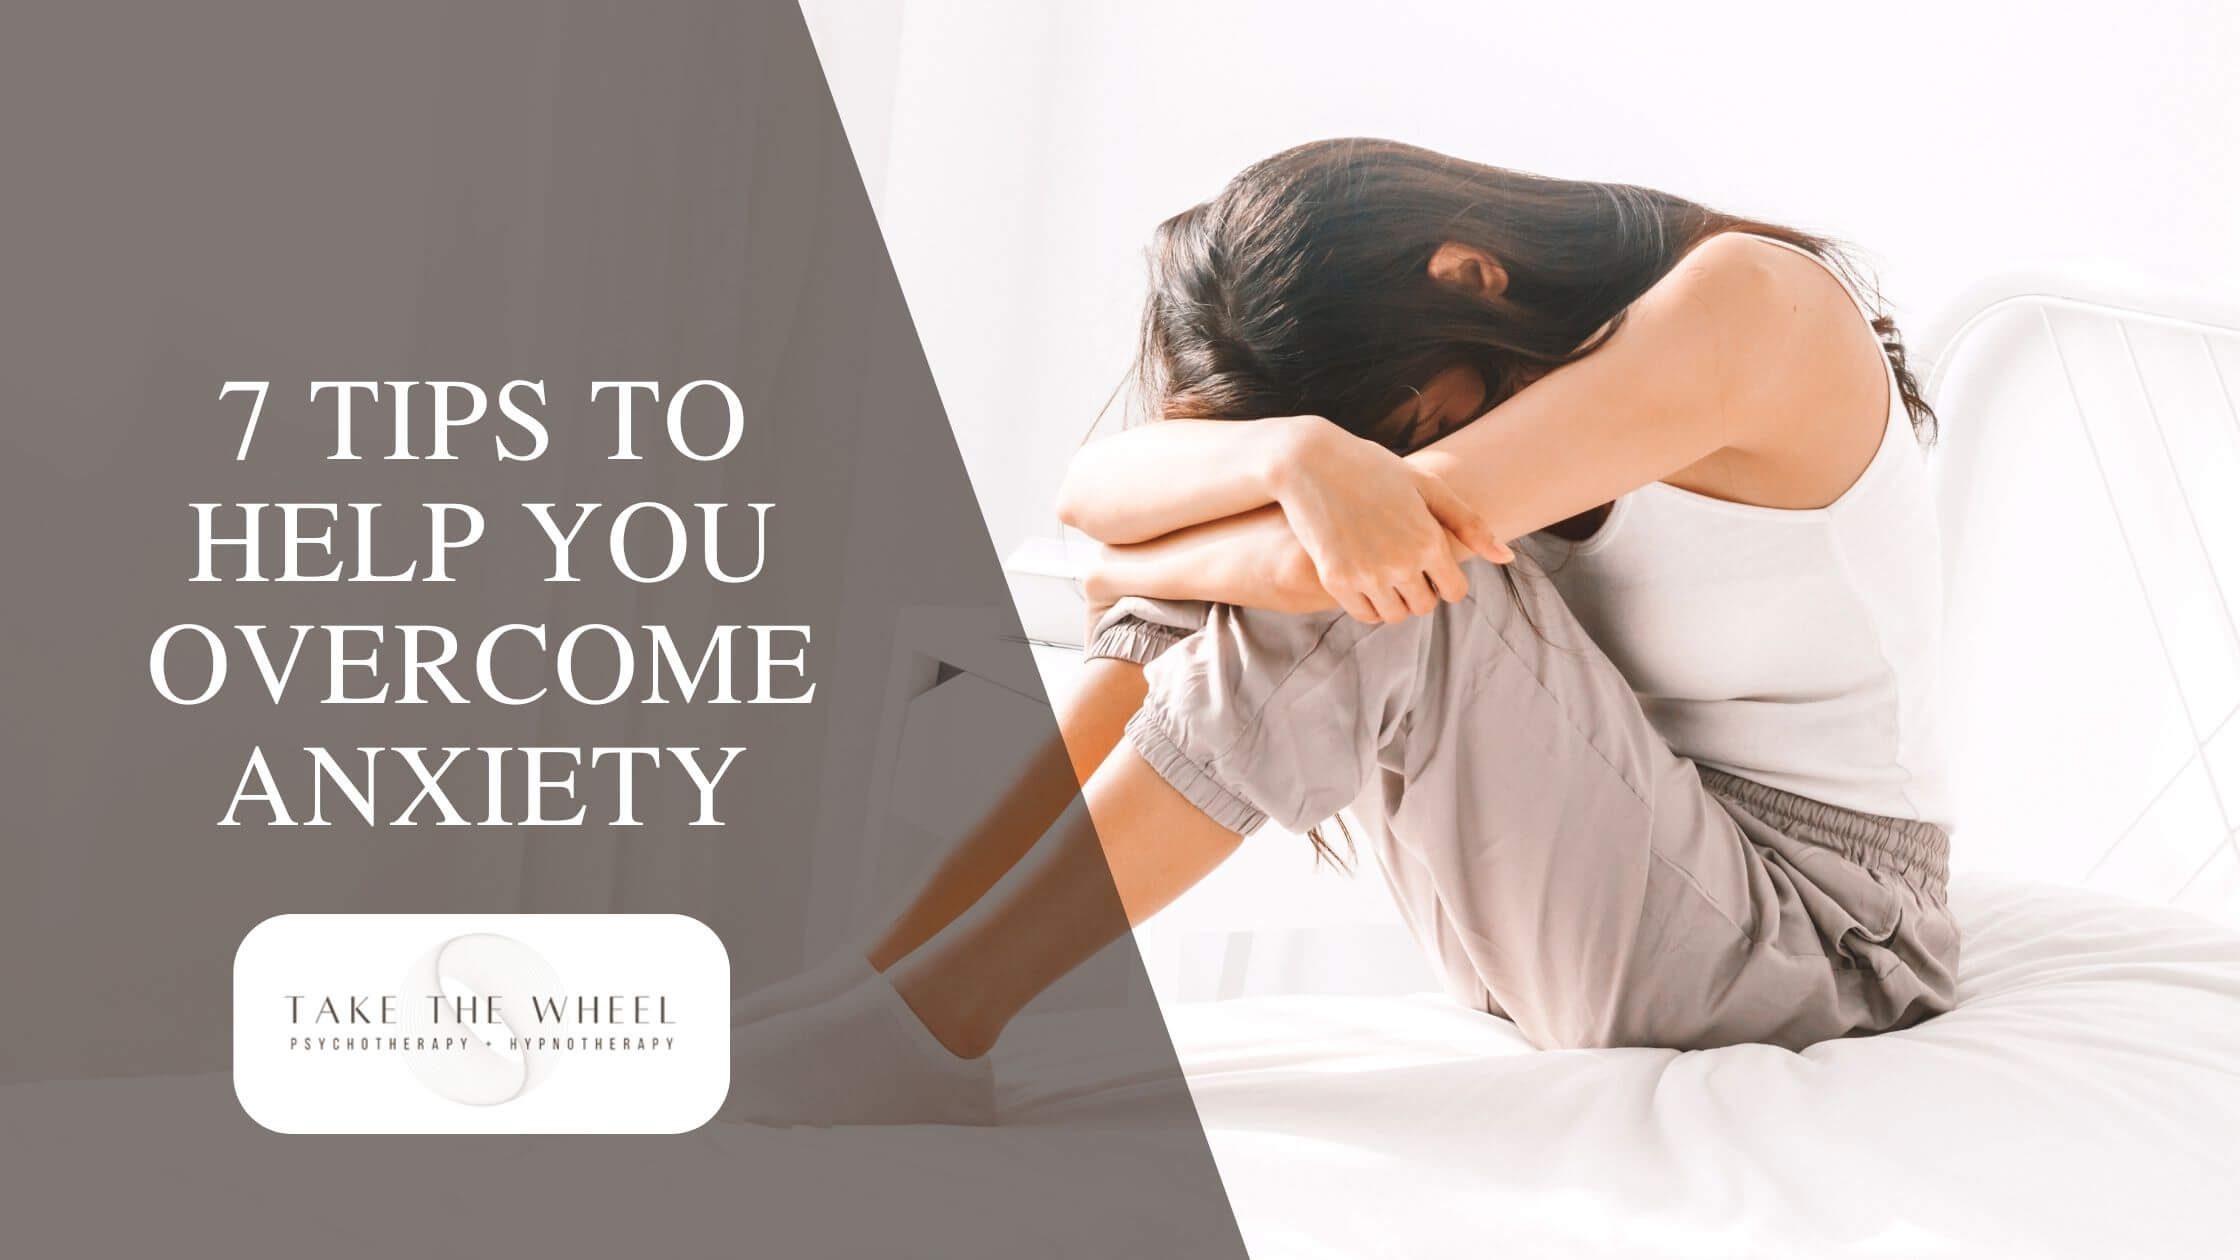 7 Tips to Help You Overcome Anxiety